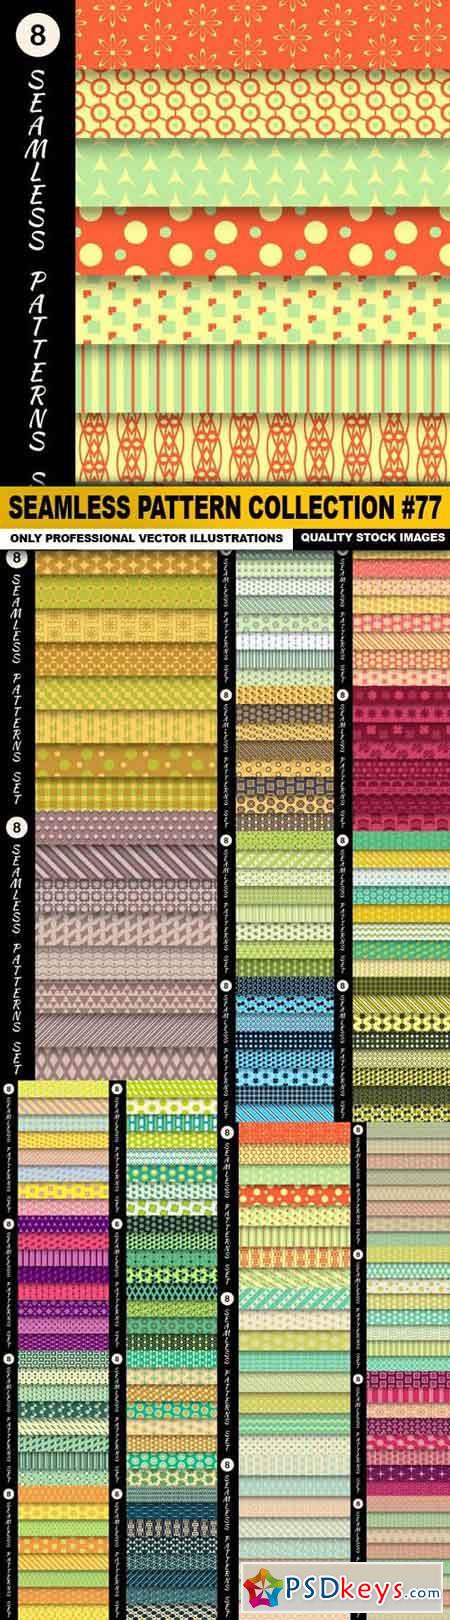 Seamless Pattern Collection #77 - 25 Vector